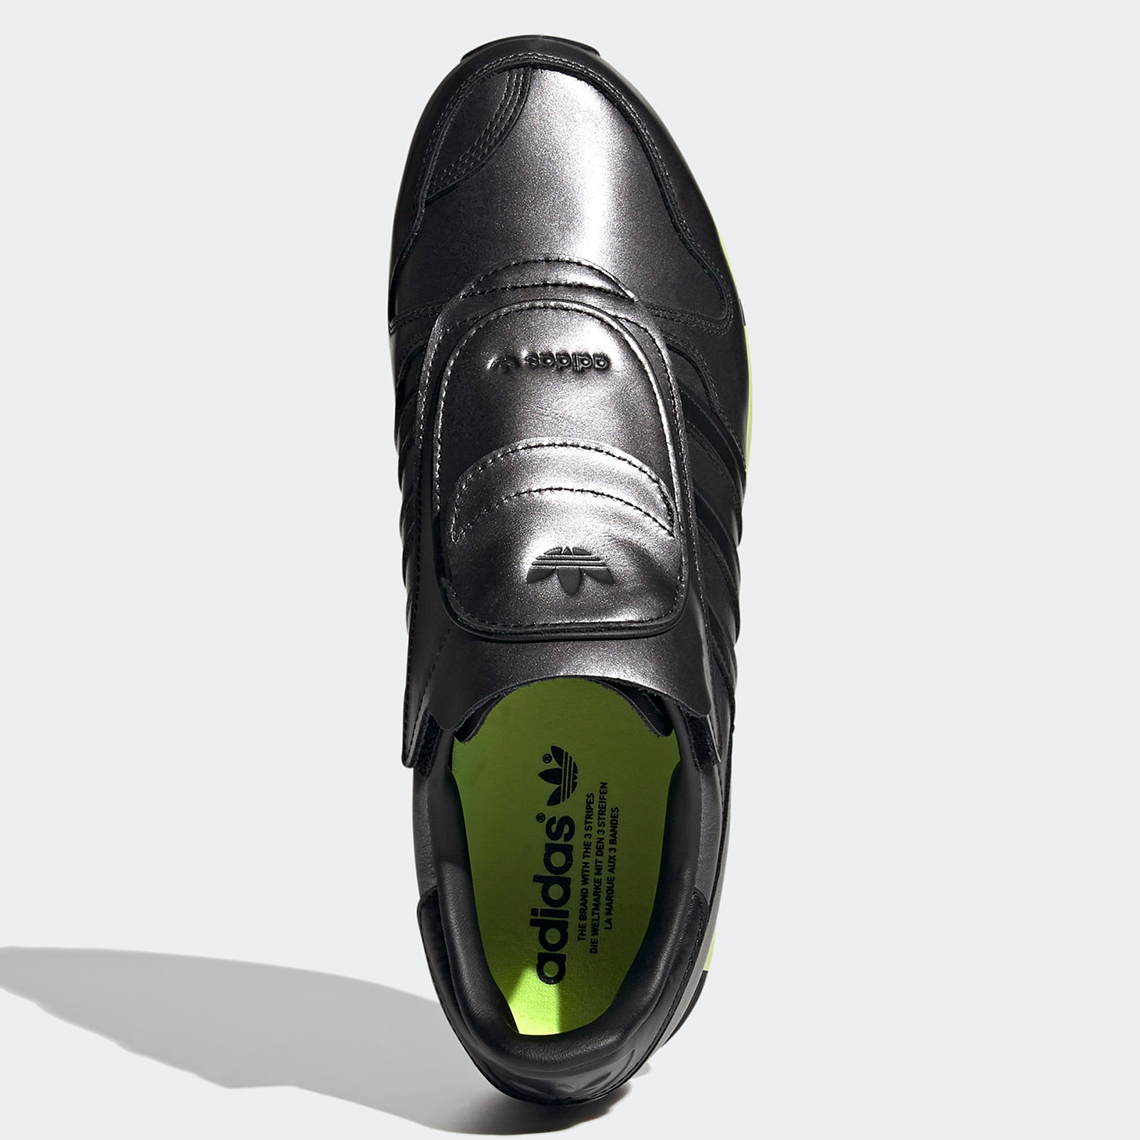 Adidas Micropacer Core Black Solar Yellow S29244 2